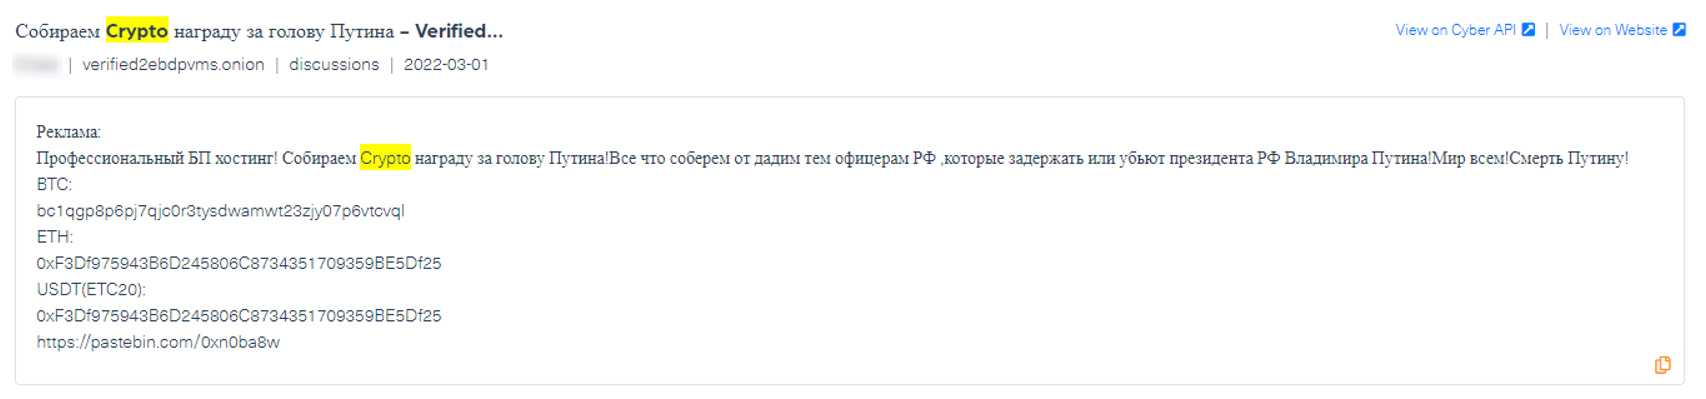 Translation: Professional BP Hosting! We are collecting a Crypto bounty for Putin's head! All that we collect from we will give to those officers of the Russian Federation who will detain or kill Russian President Vladimir Putin! Peace to all! D**th to Putin!